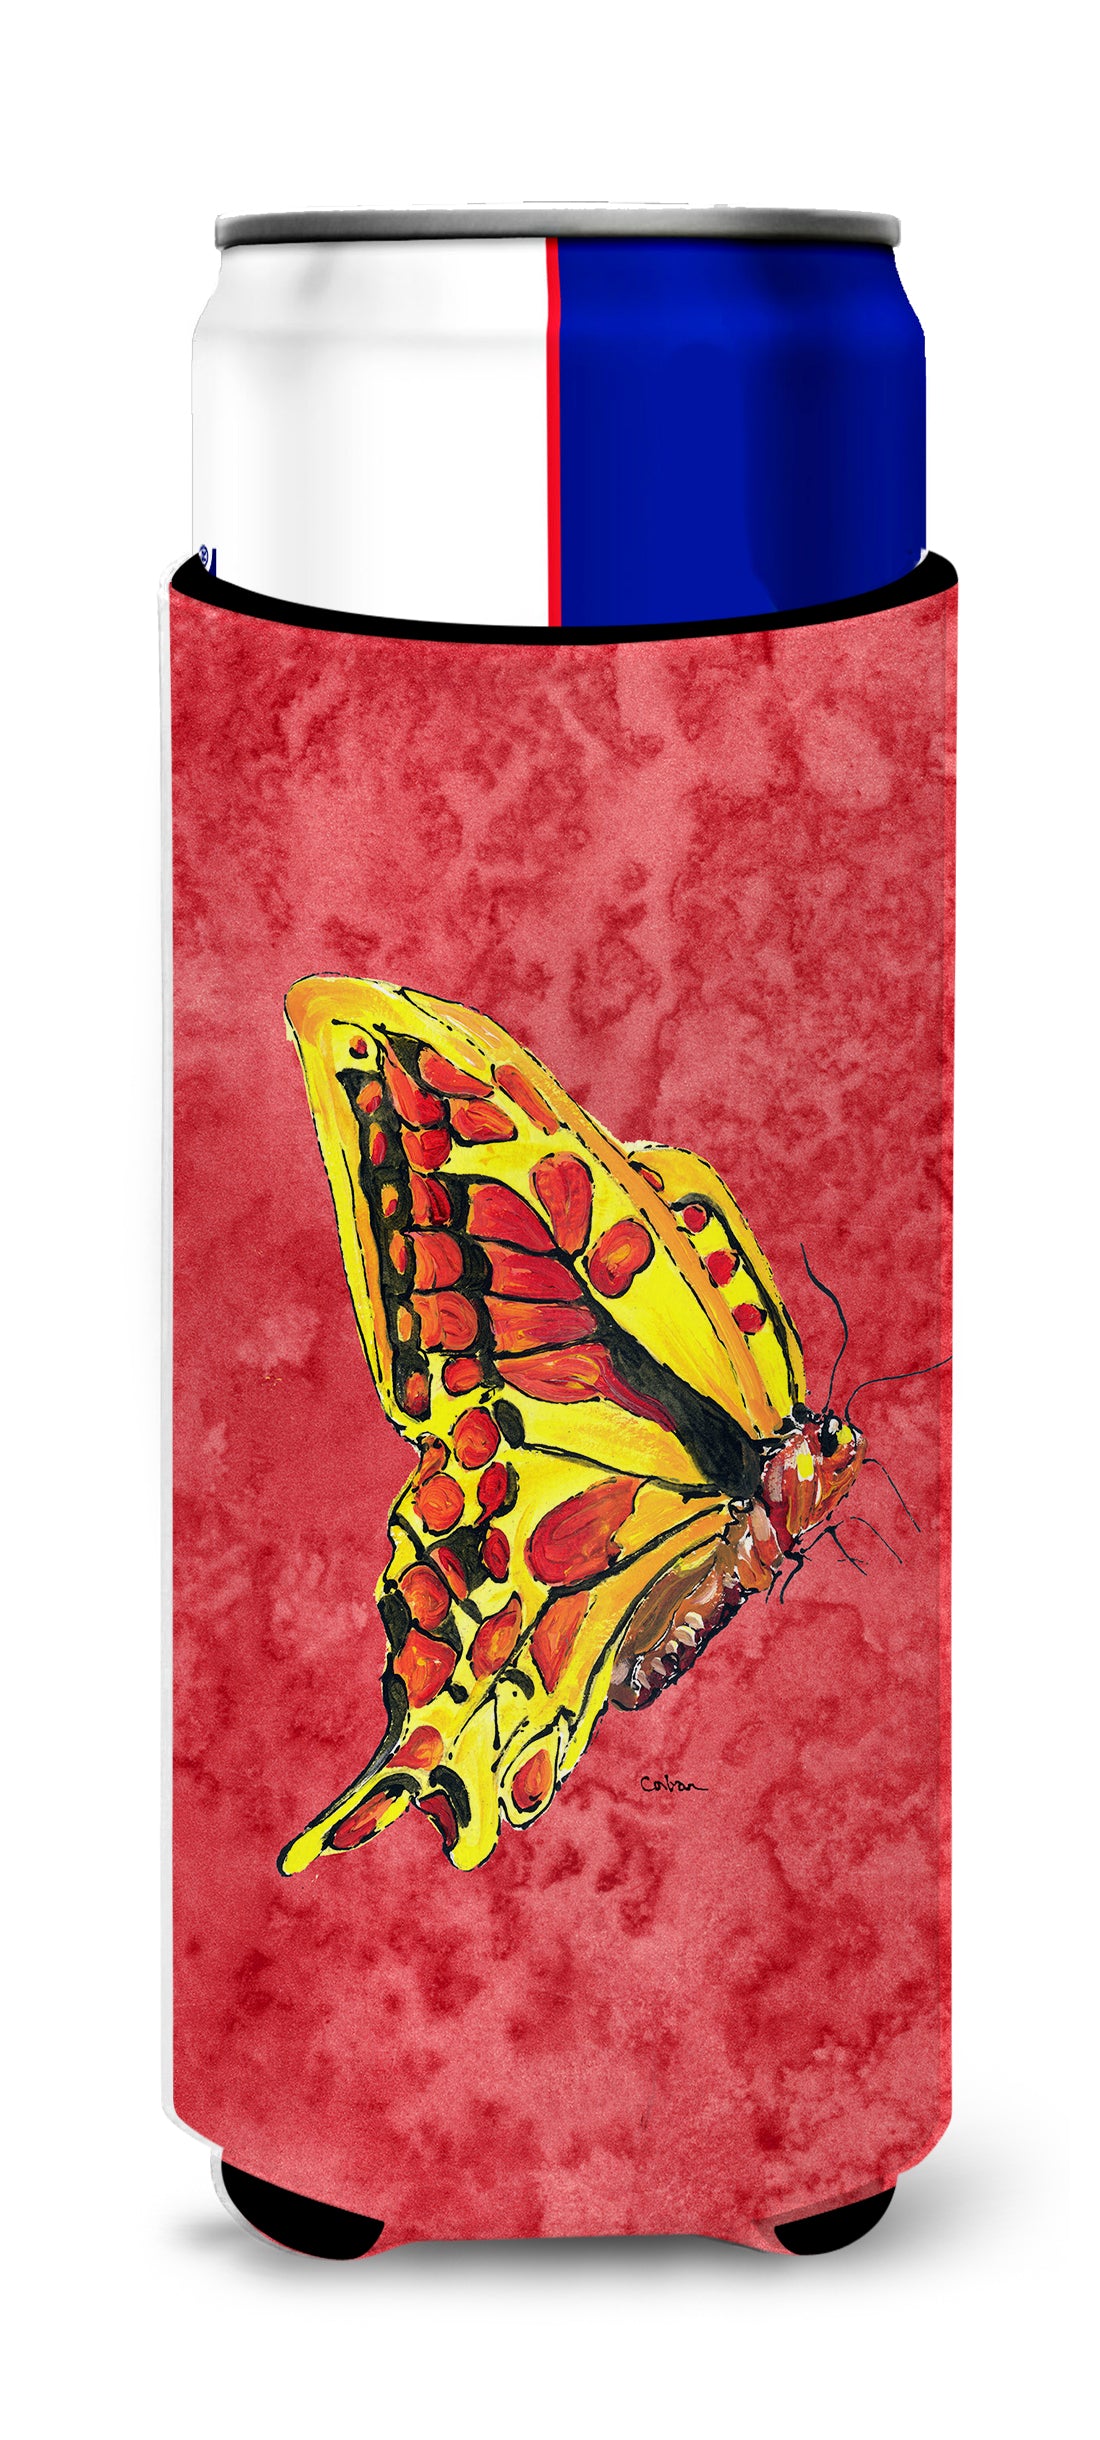 Butterfly on Red Ultra Beverage Insulators for slim cans 8862MUK.